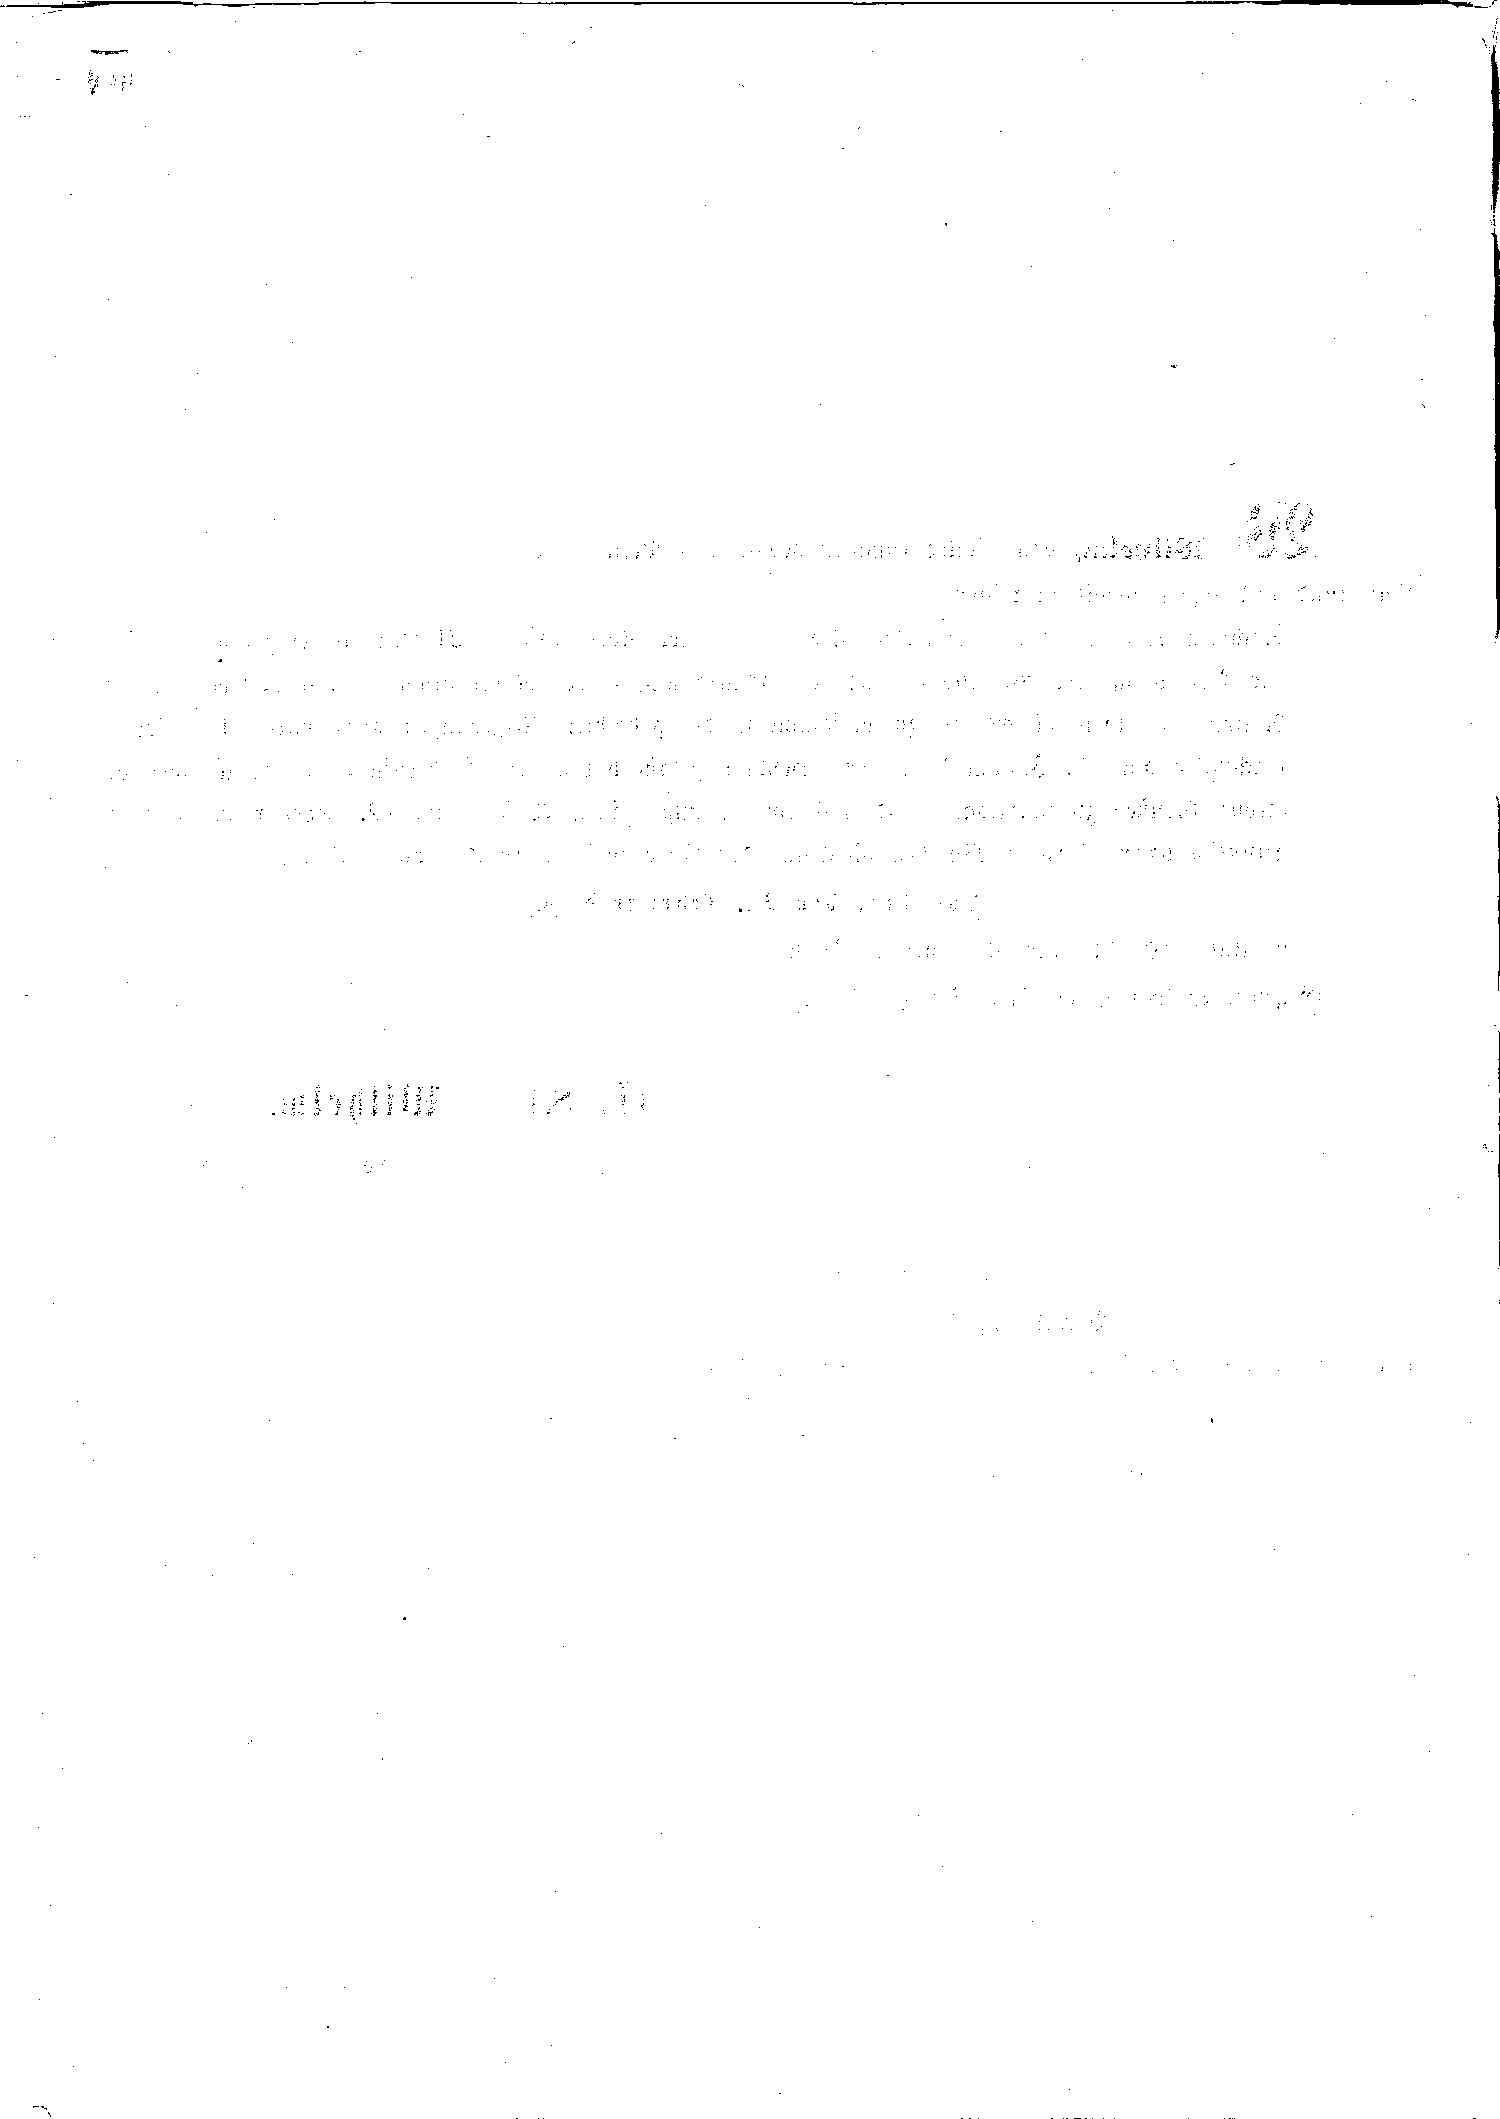 Scan of page VIII